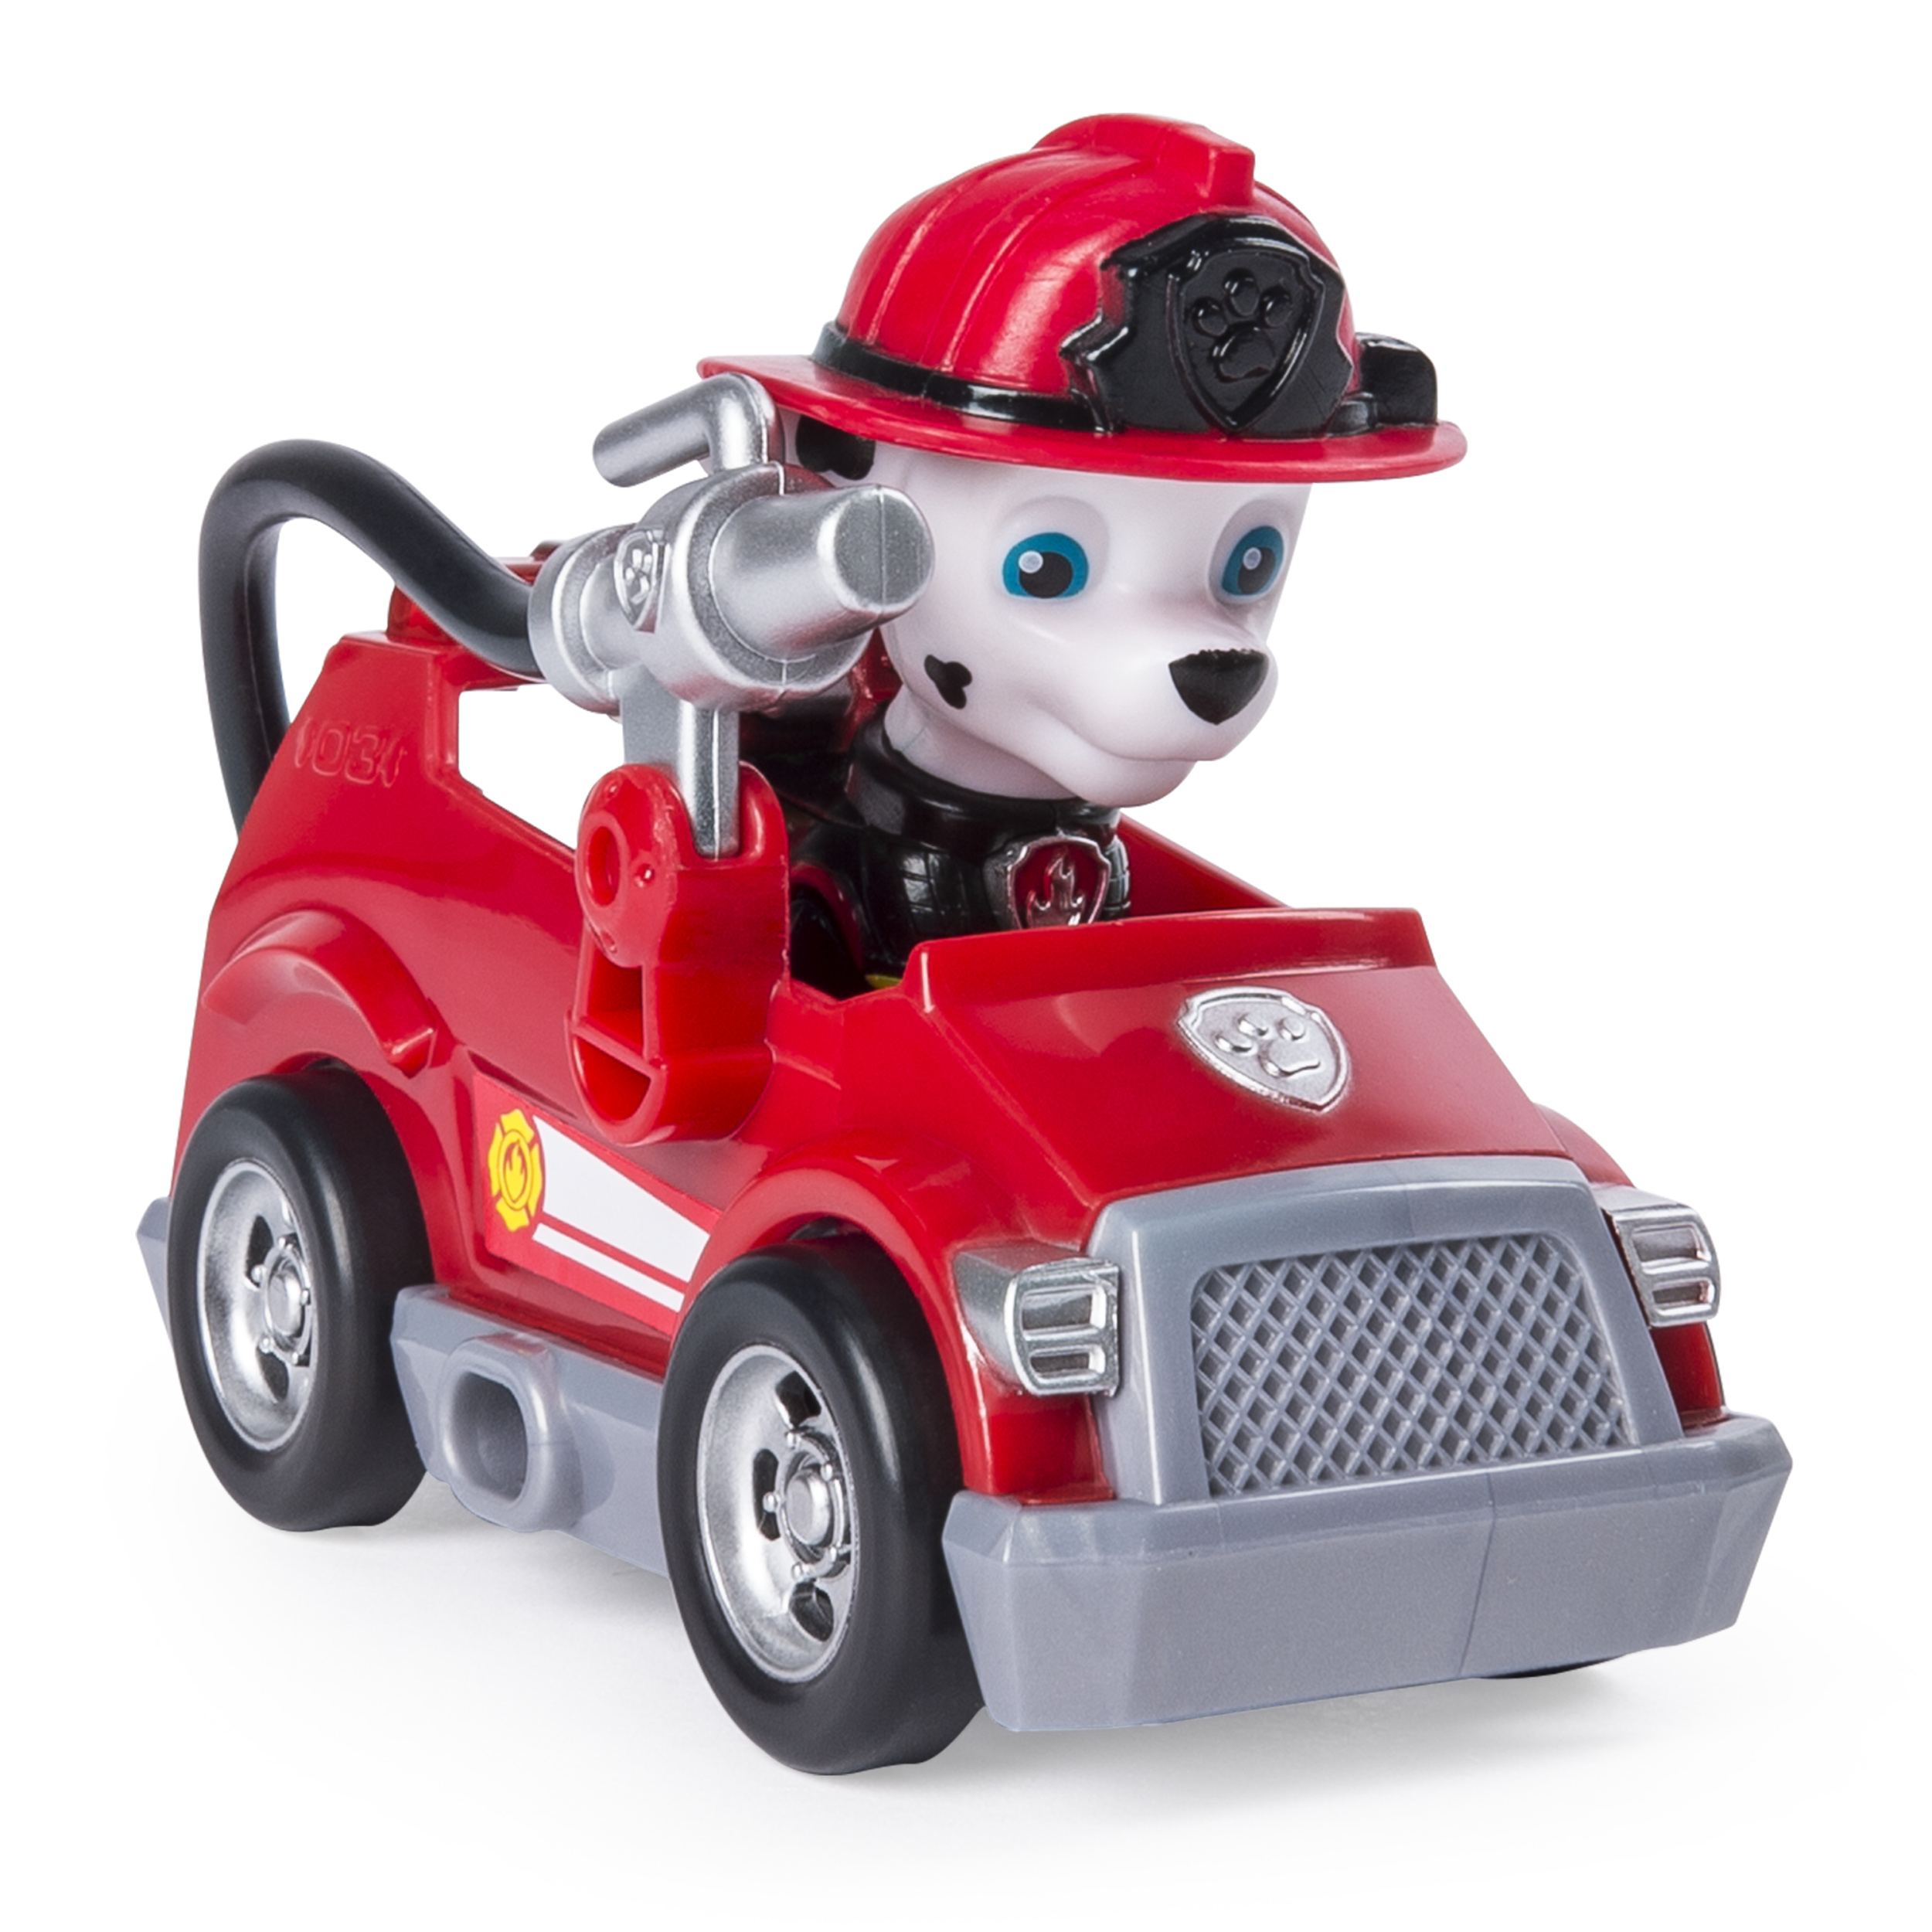 PAW Patrol Ultimate Rescue, Marshall’s Mini Fire Cart with Collectible Figure, for Ages 3 and Up - image 3 of 6